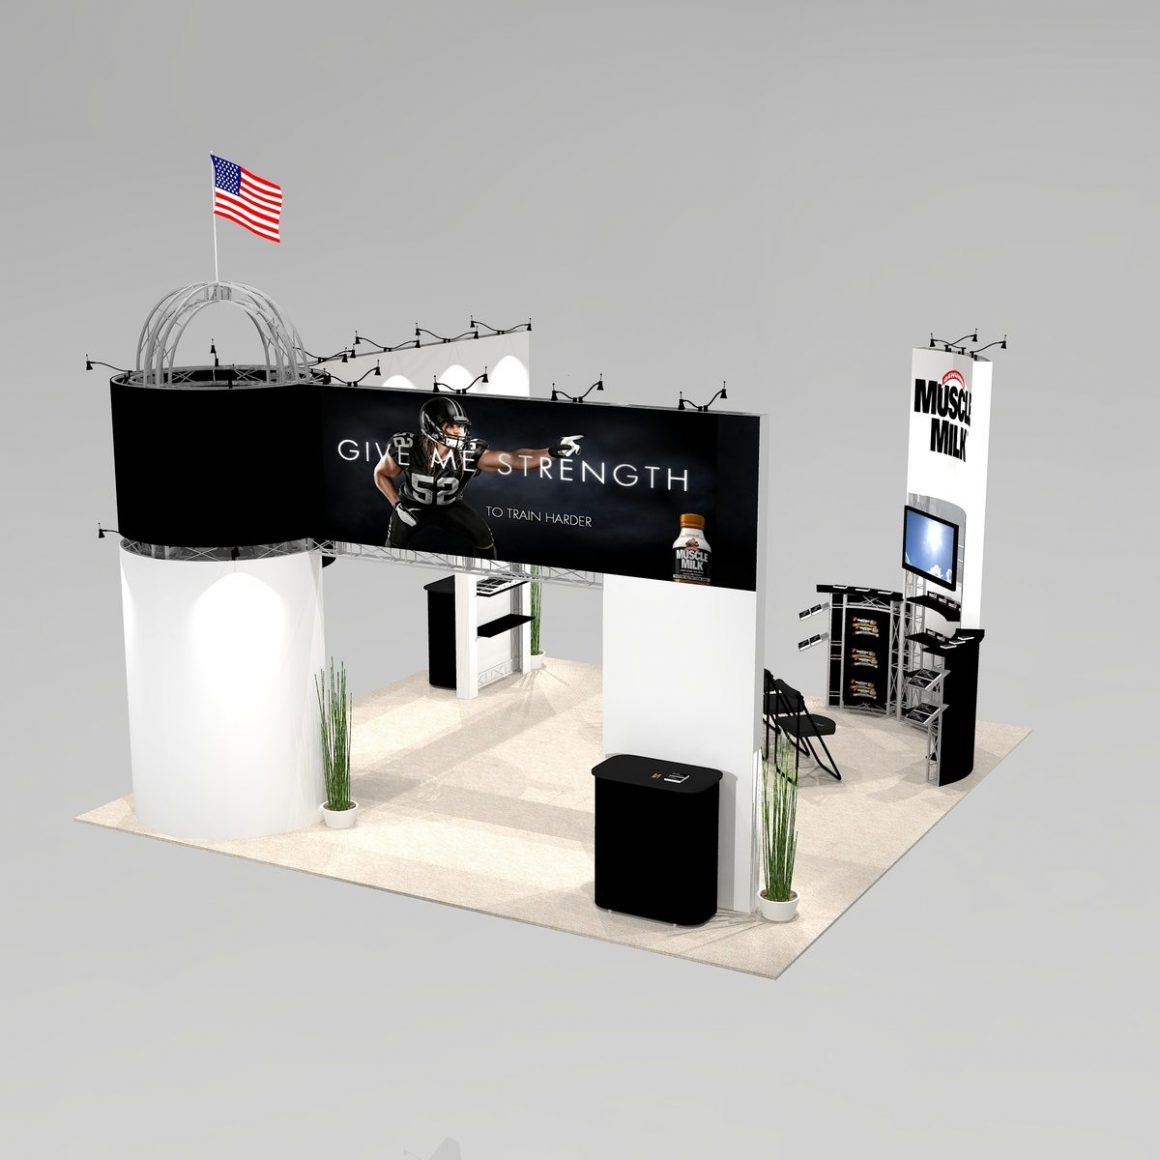 Trade show exhibit design featuring domed tower and ample seating with product display CHI2020 Graphic Package A